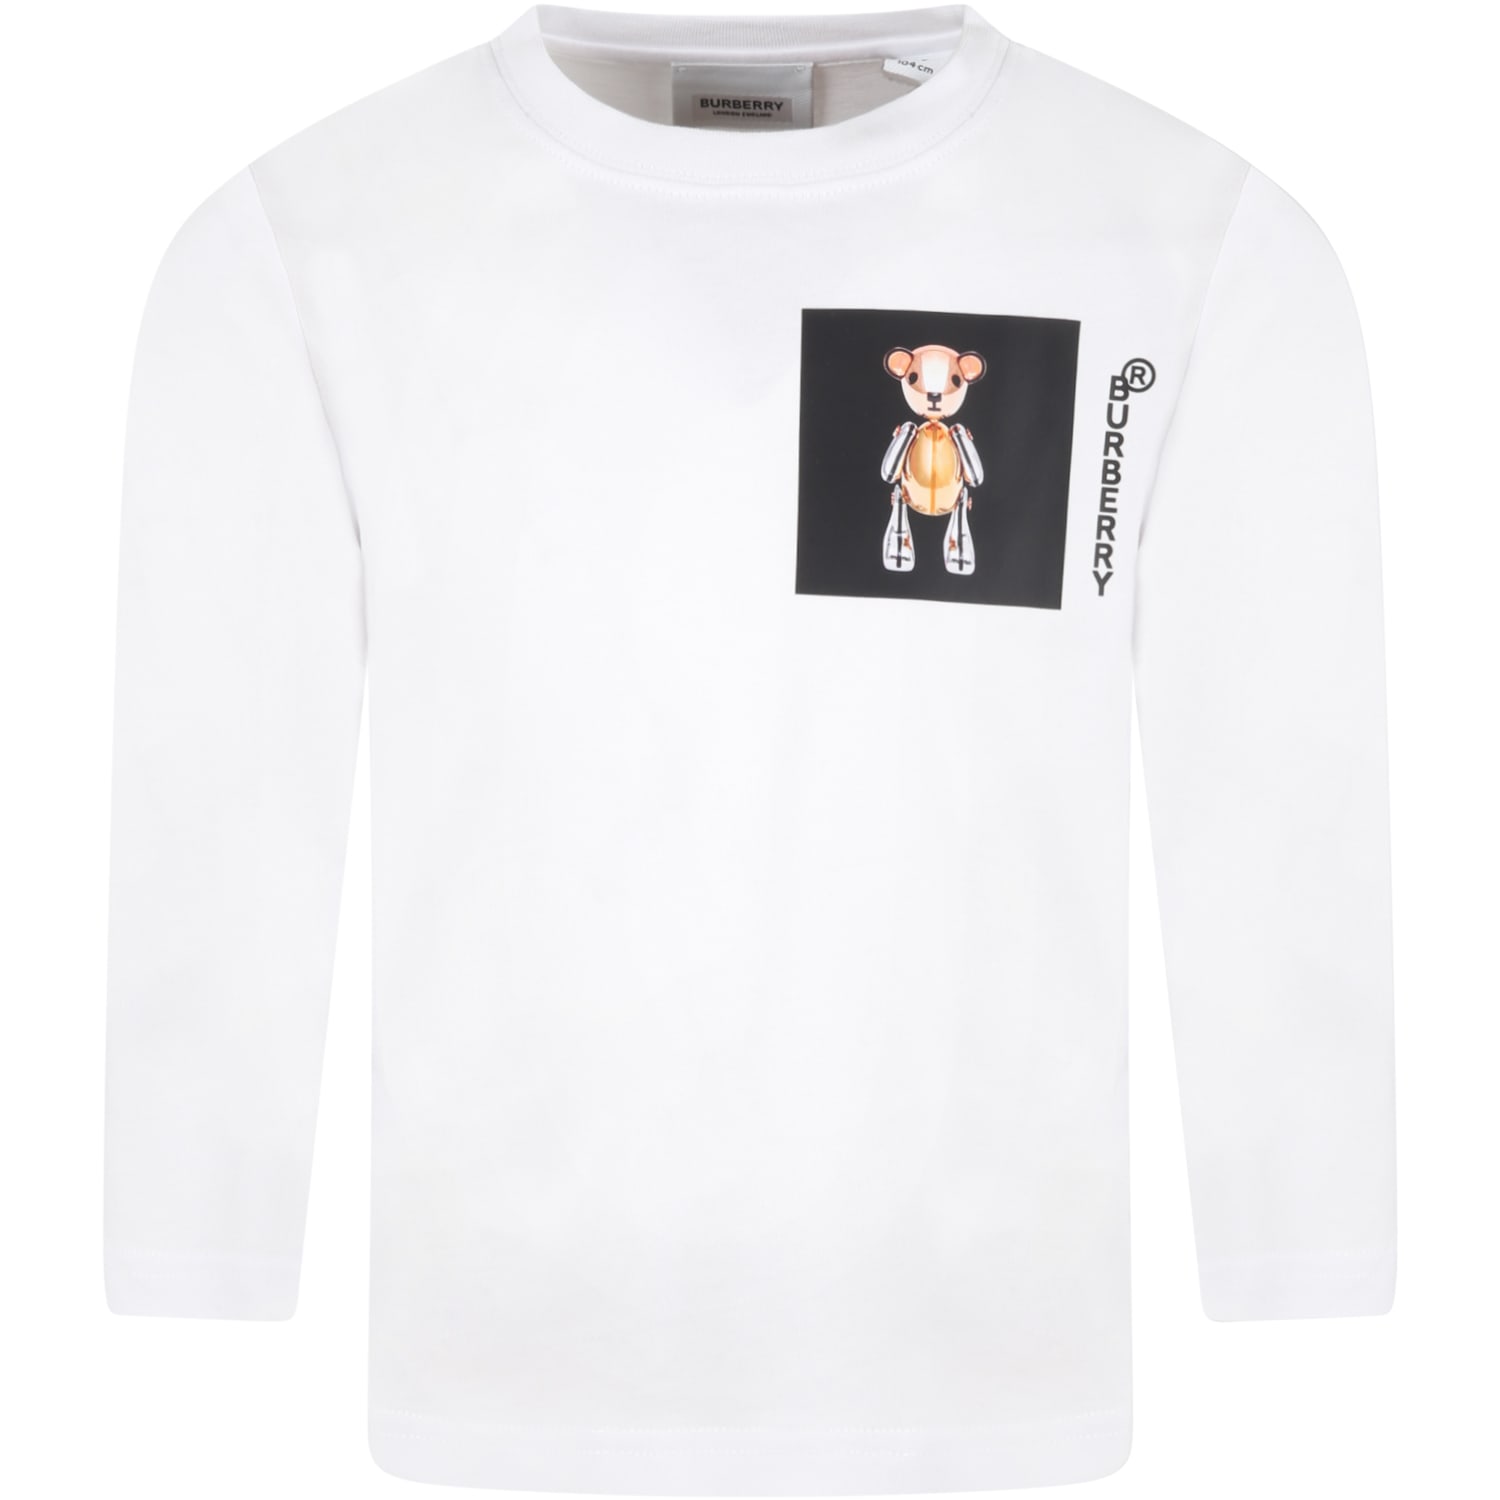 Burberry White T-shirt For Kids With Thomas Bear And Black Logo